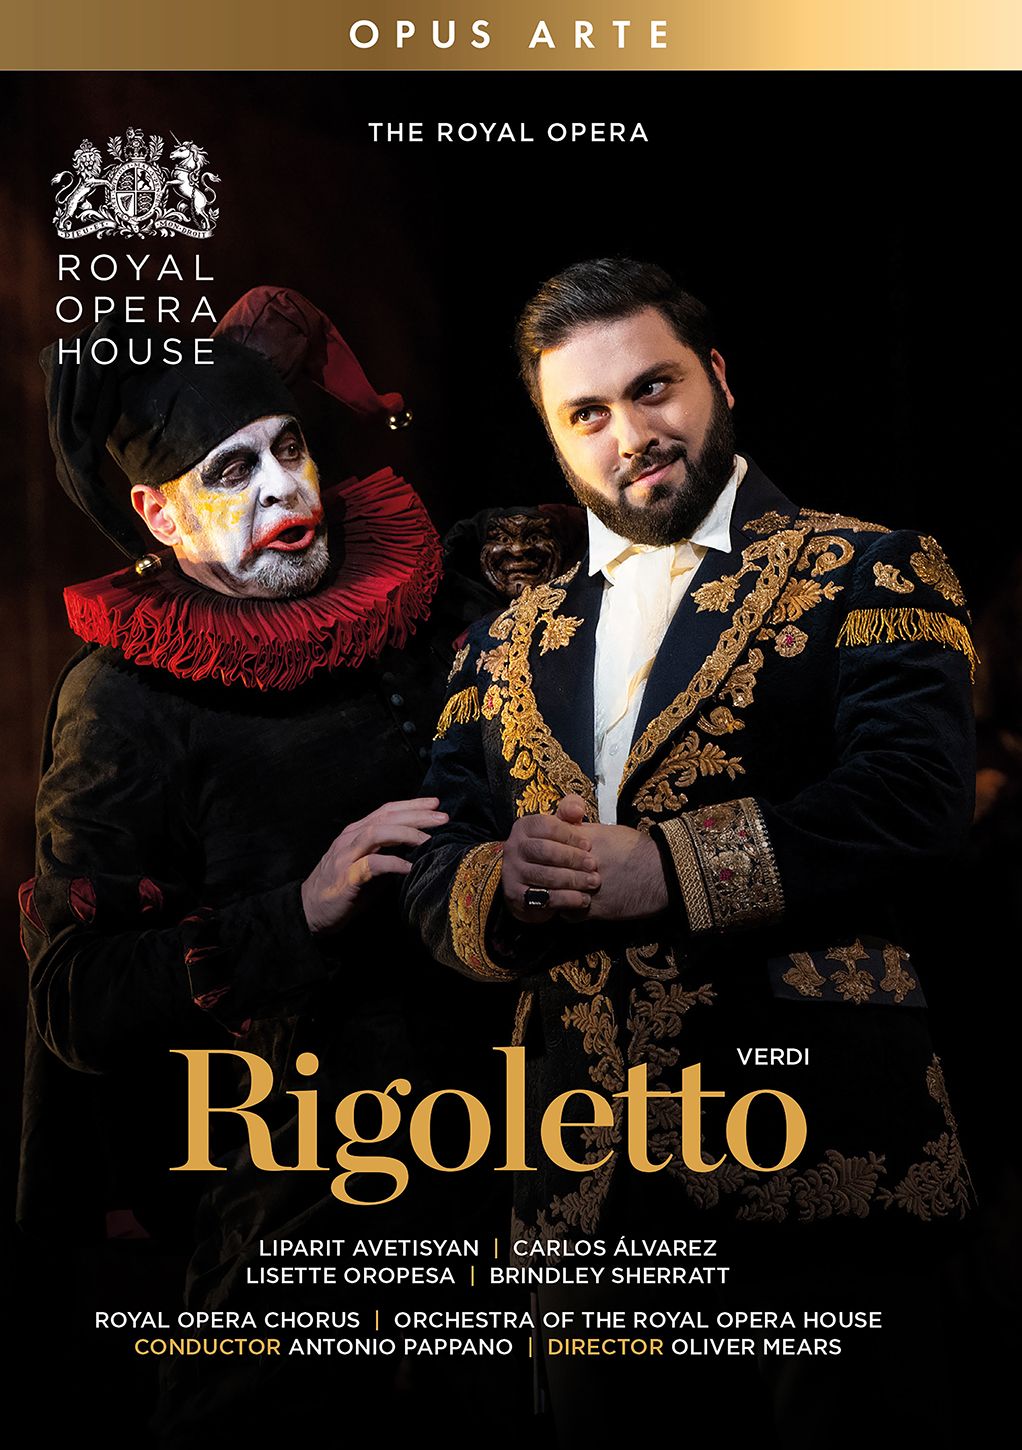 Oliver Mears' Rigoletto at the Royal Opera House